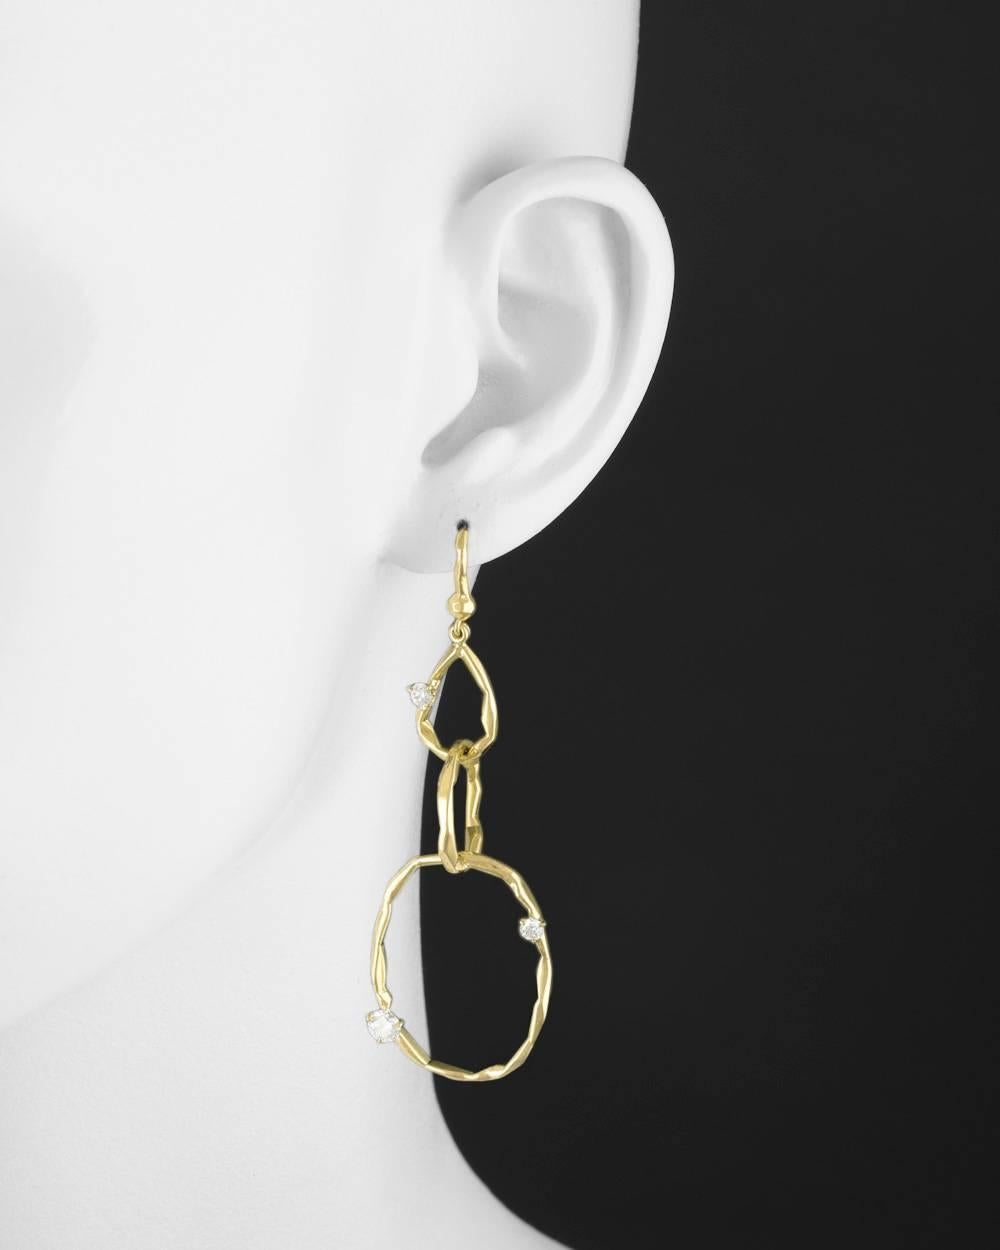 Triple hoop pendant earrings, each designed as three graduation interlocking hoop links suspended from a French wire and accented by circular cut diamonds, in 18k yellow gold, signed Mimi So. Six diamonds weighing approximately 0.90 total carats